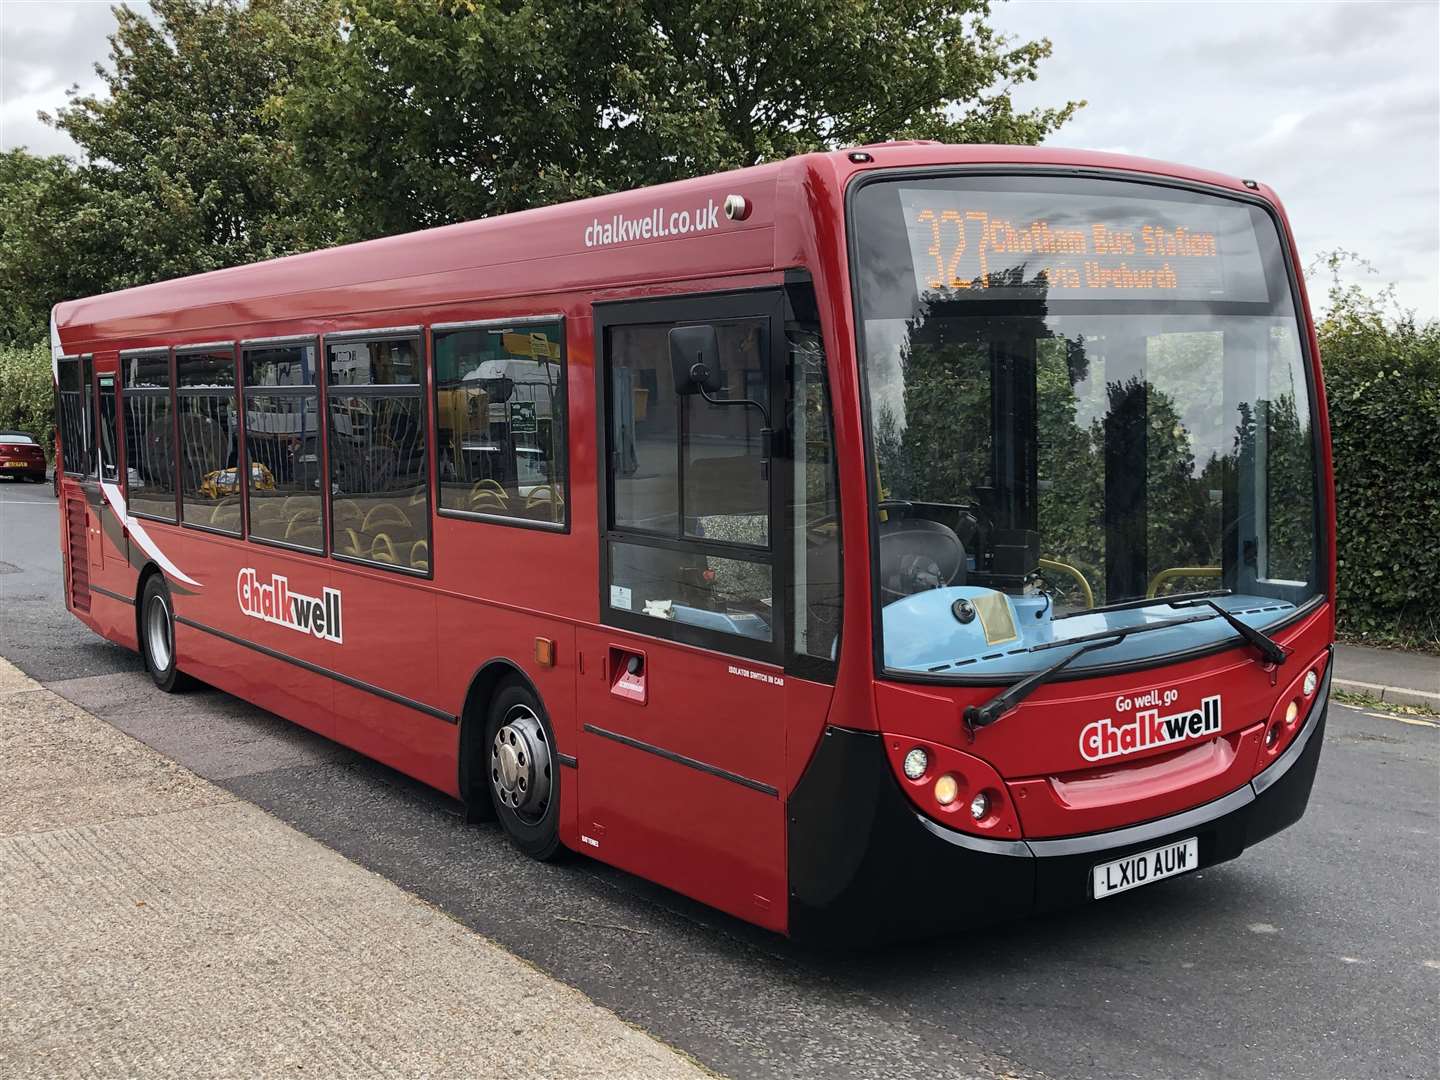 In with the new - red Chalkwell buses will take over the old Arriva routes on Sheppey